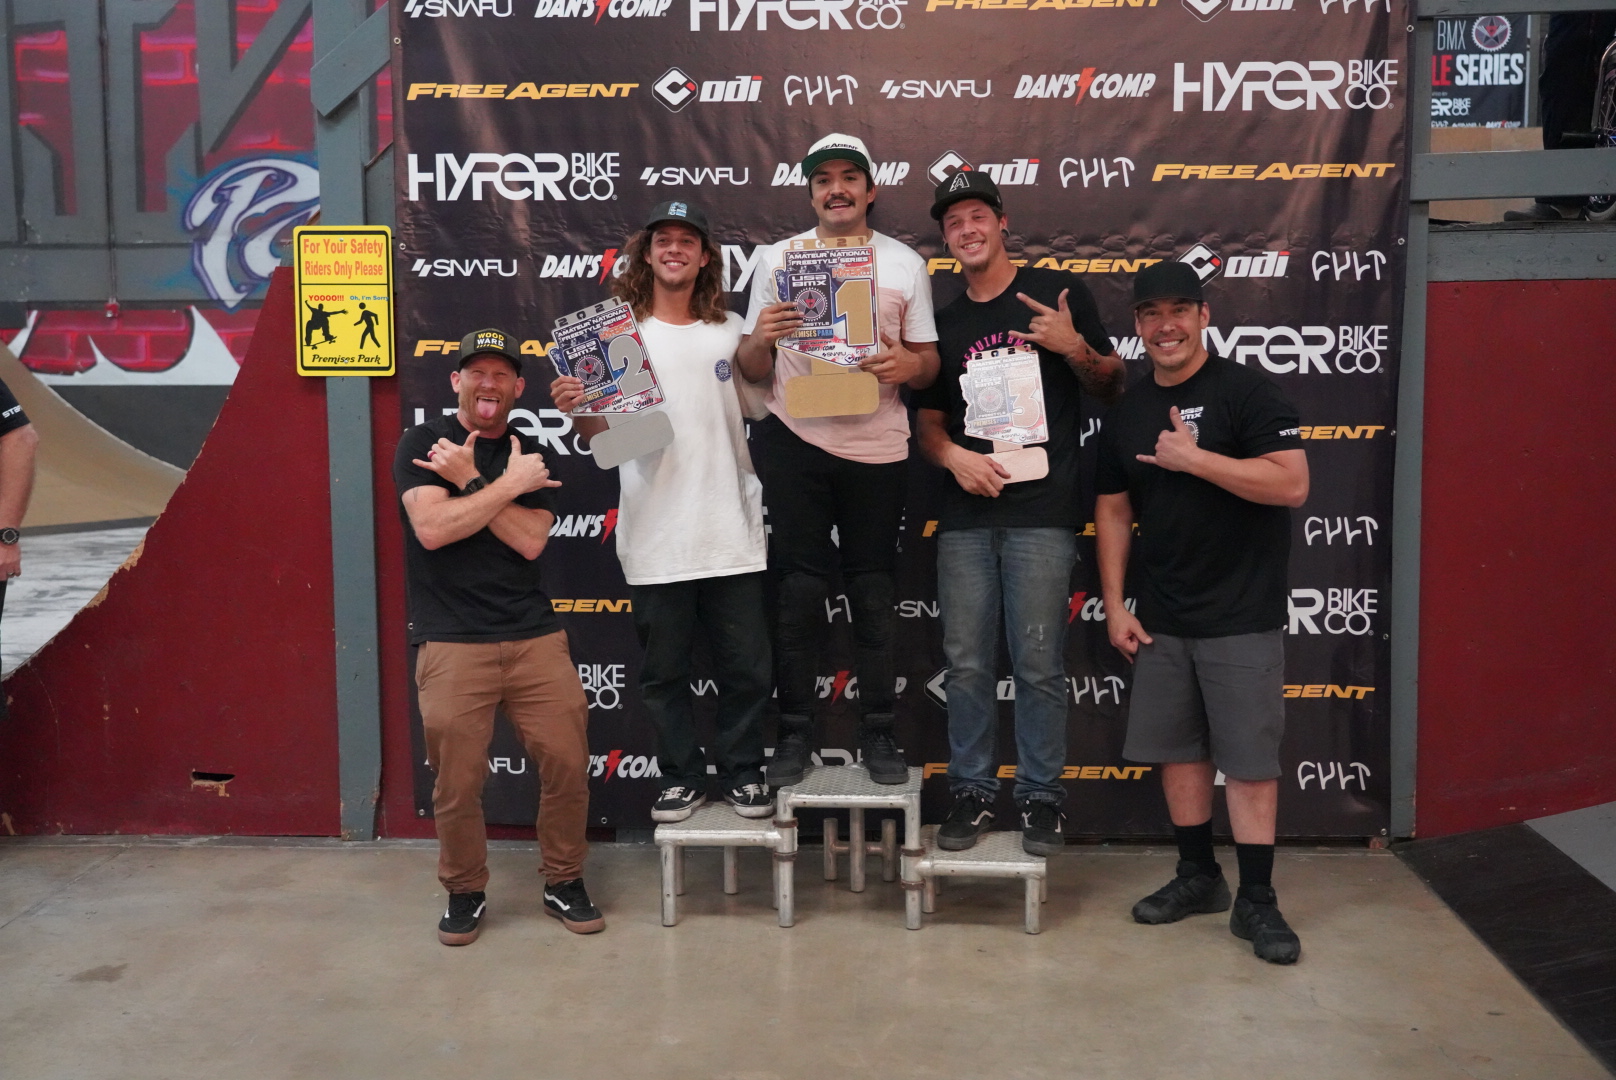 Free Agent rider Dante Tabuyo stand on the podium in first place at the first stop of the USA BMX Freestyle series at Premises Park in Tucson, Az.